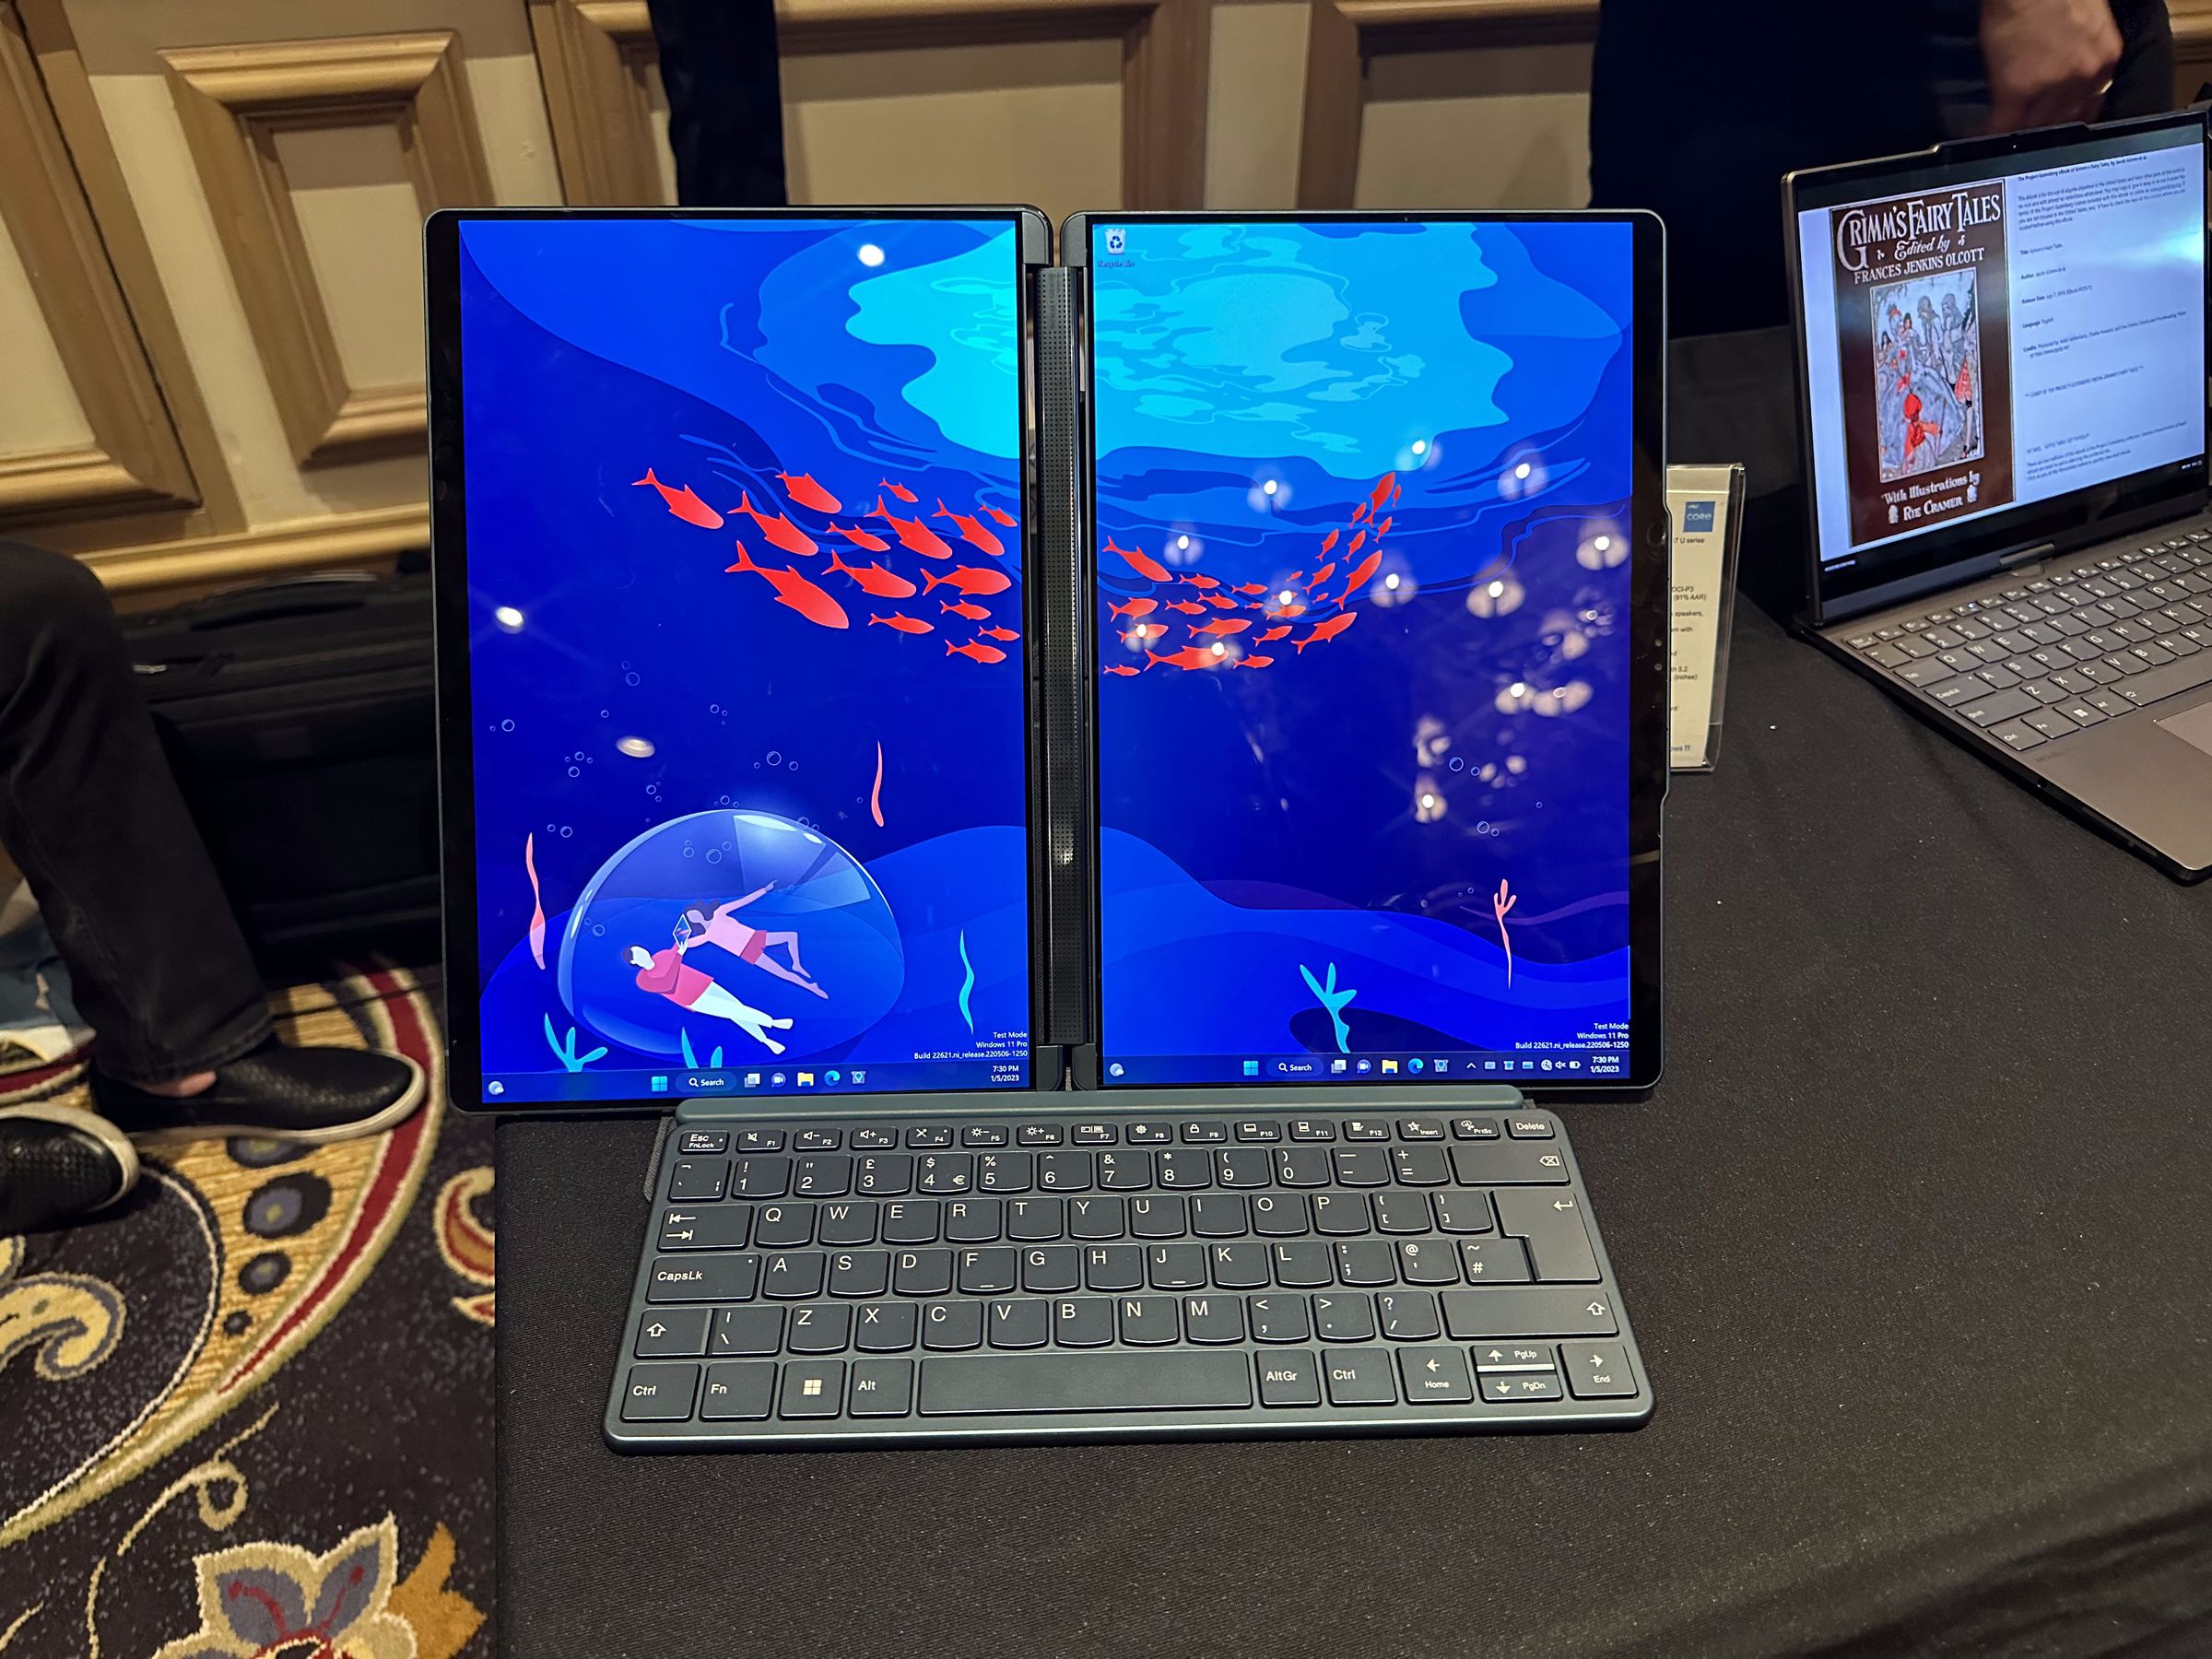 The Lenovo Yoga Book 9i in horizontal mode with the keyboard attached.